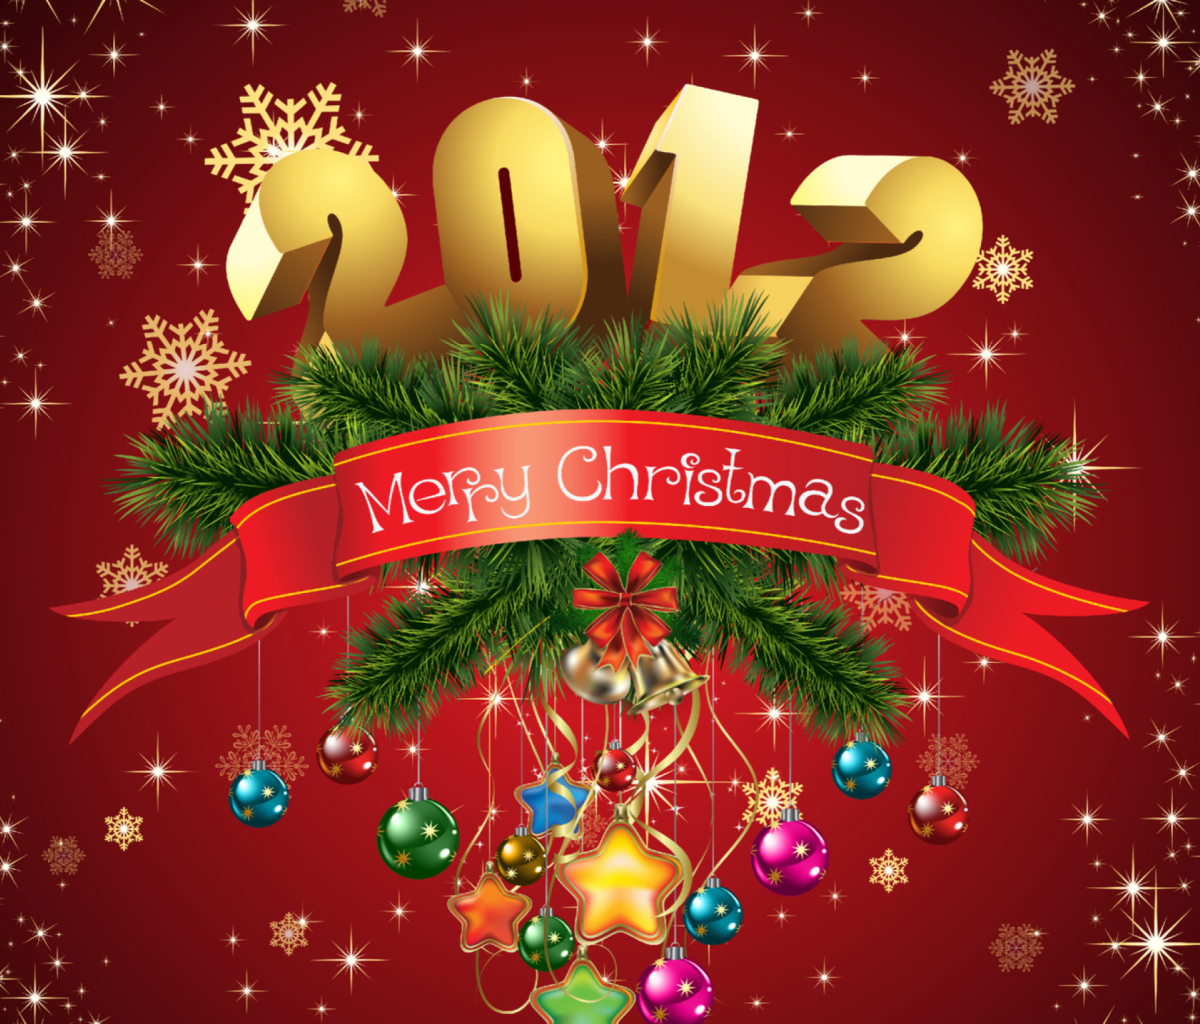 New Year And Merry Christmas wallpaper 1200x1024